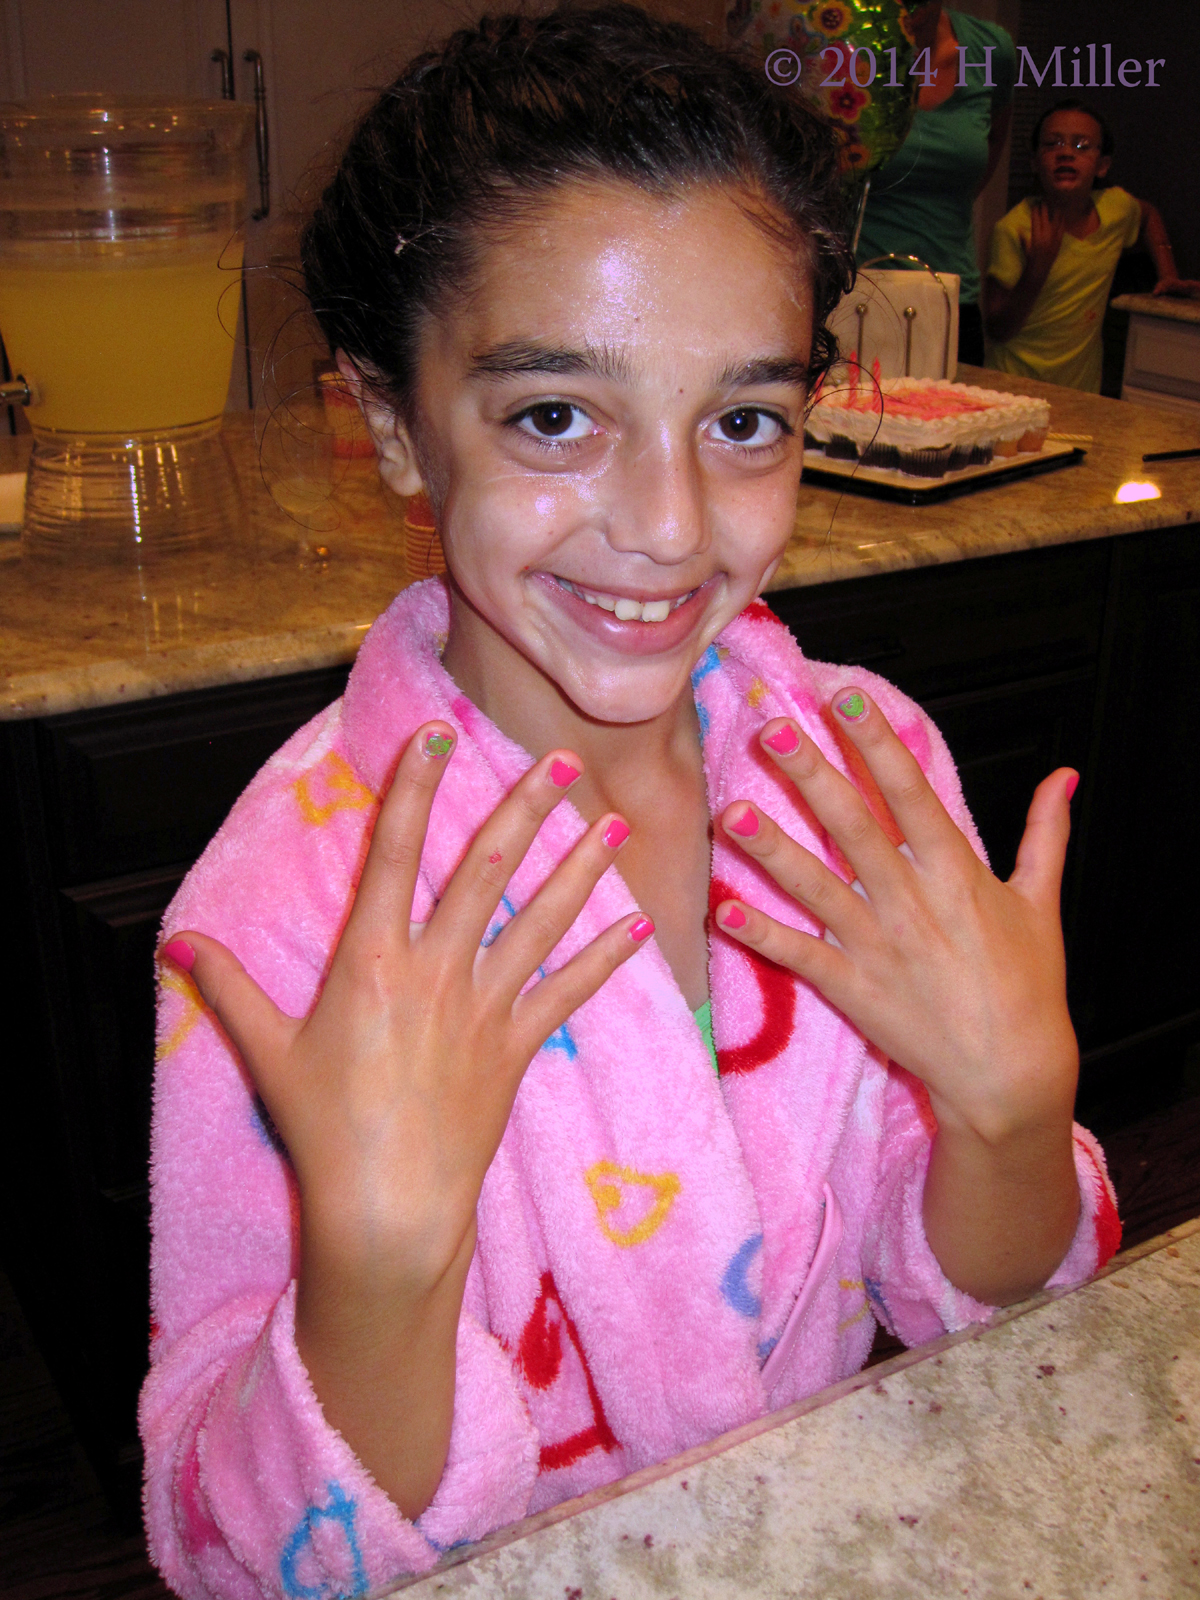 Showing Her Finished Mani.